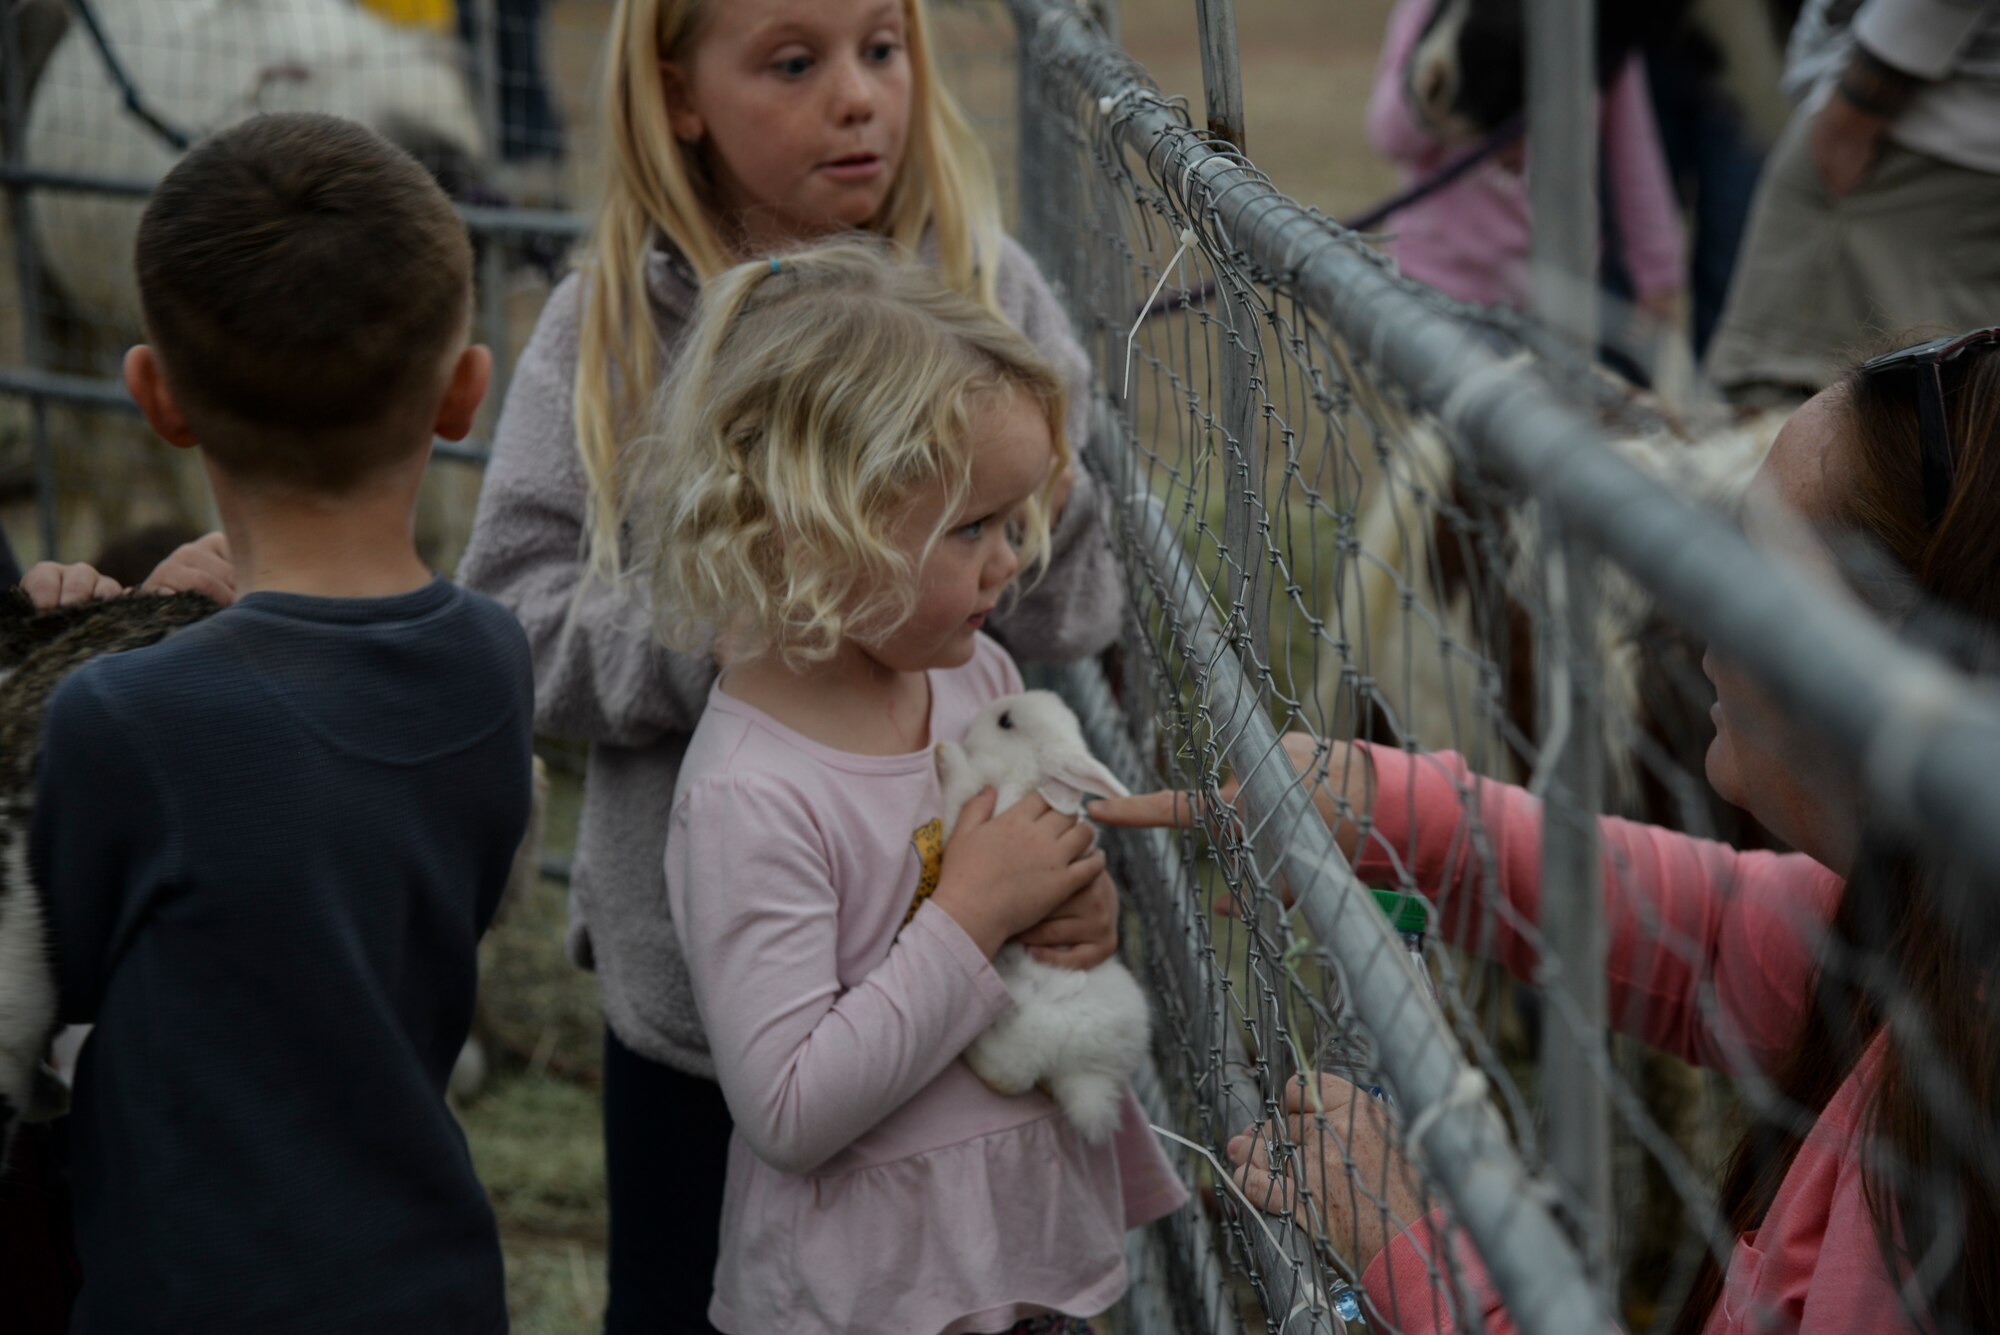 a photo of A child holding a bunny during a base holiday event.